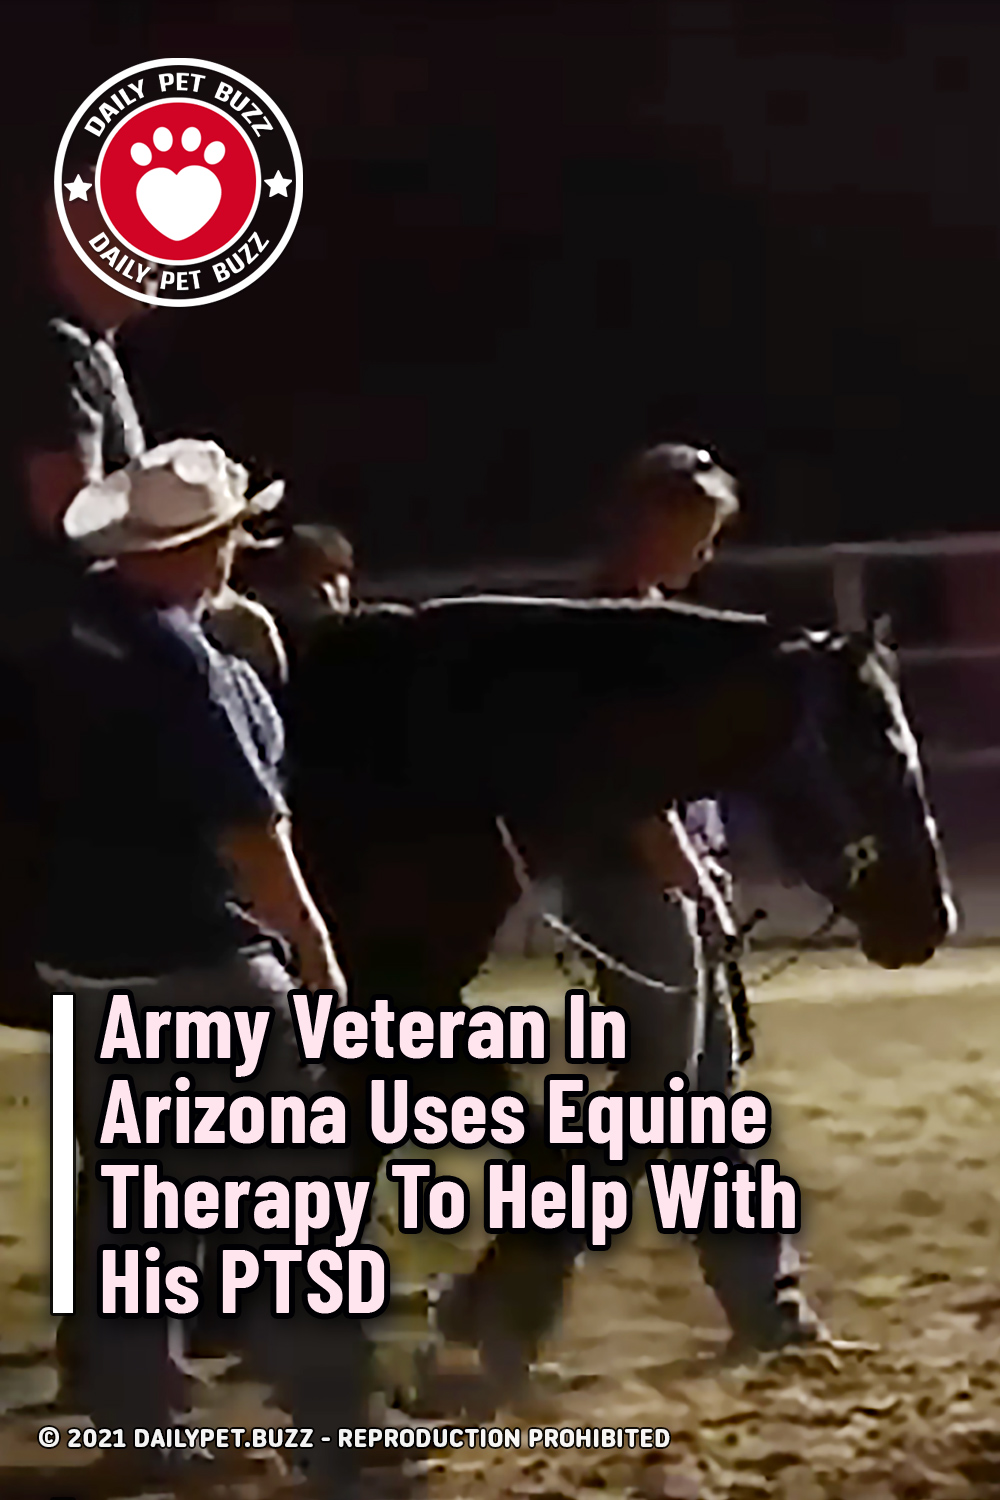 Army Veteran In Arizona Uses Equine Therapy To Help With His PTSD